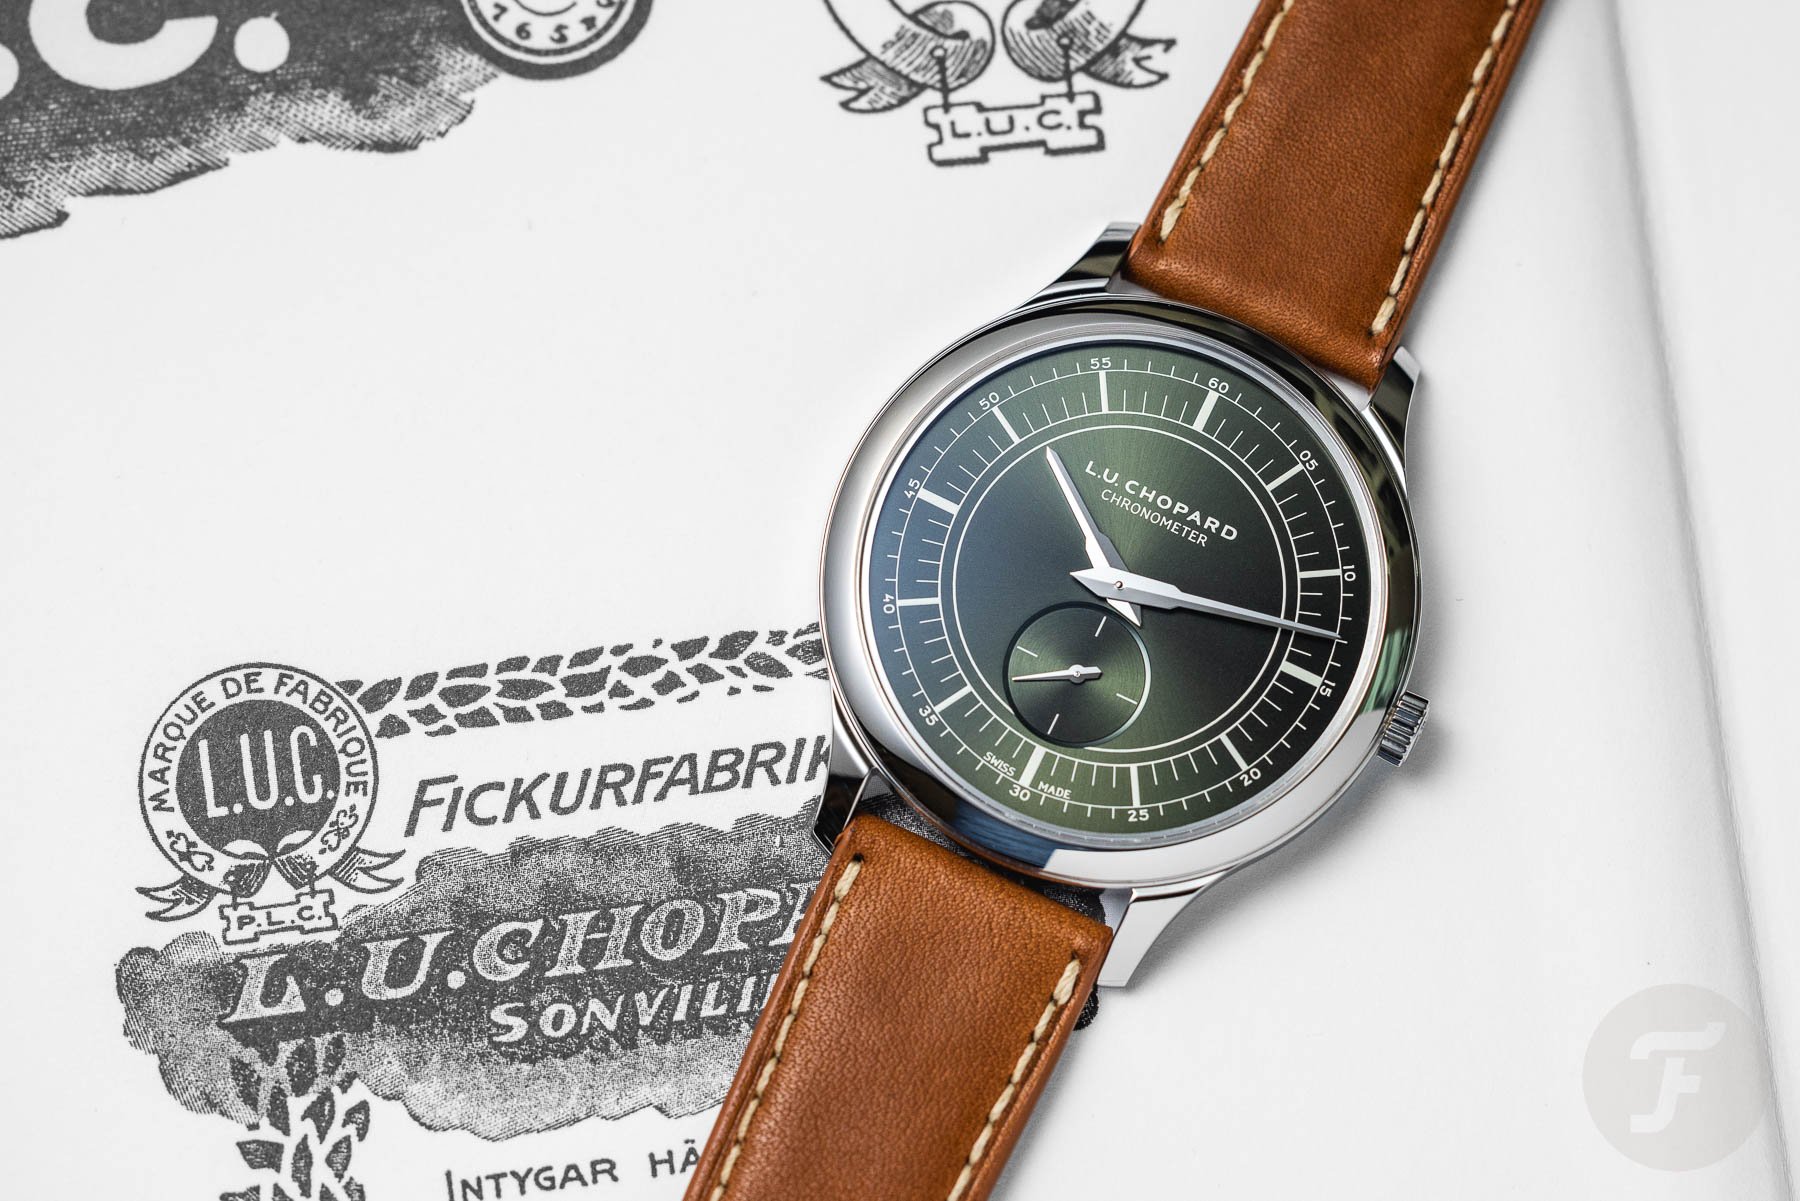 Introducing the Sackett, Hoyt, Degraw, and Wyckoff Italian-Made Watch Straps by Windup Watch Shop